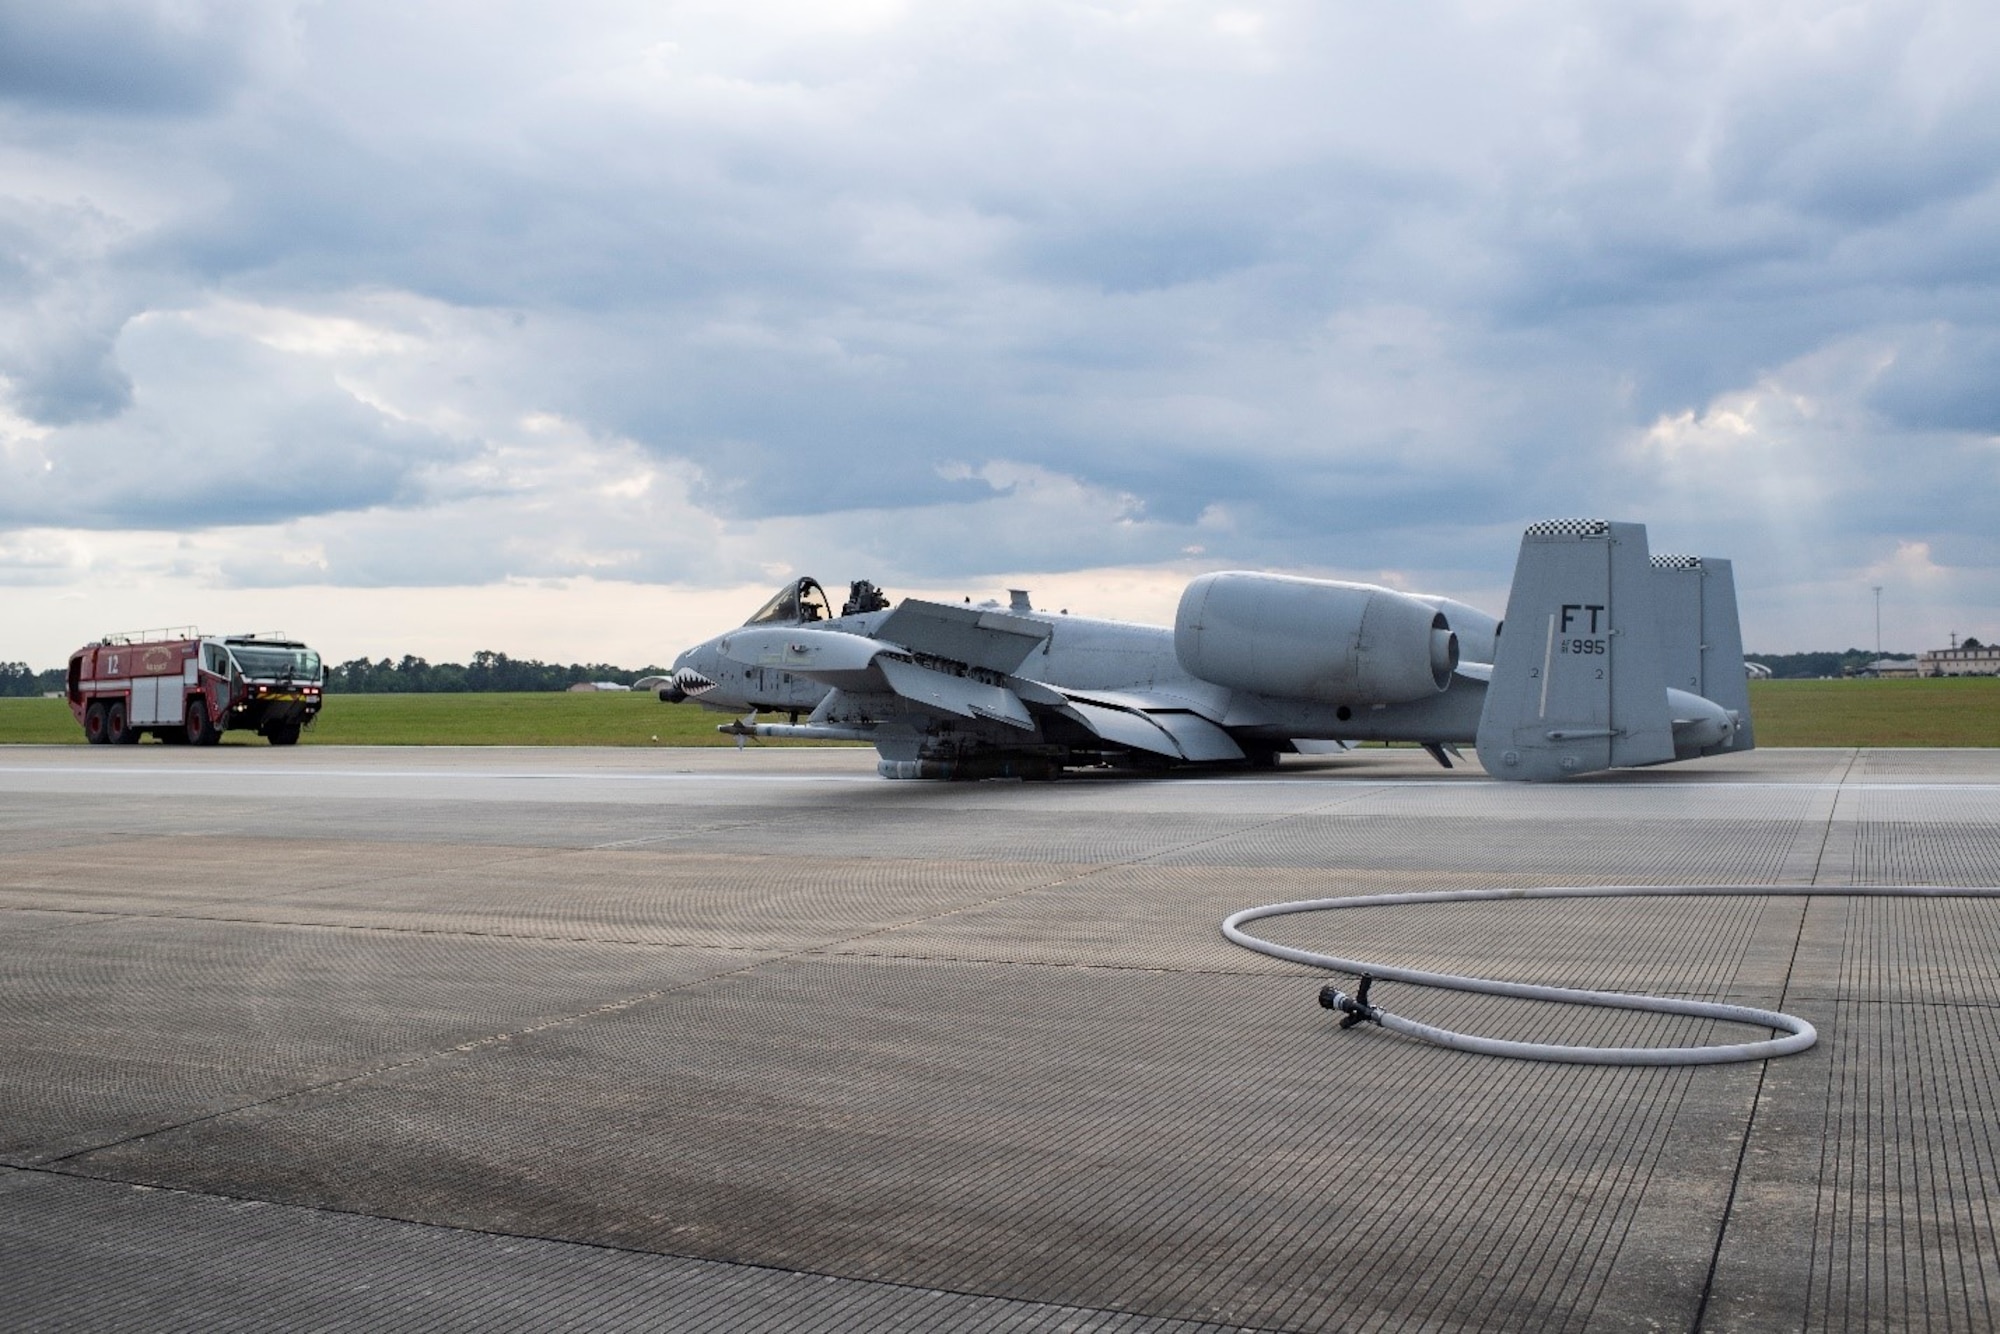 A photo of an A-10C Thunderbolt II aircraft sitting on the runway.